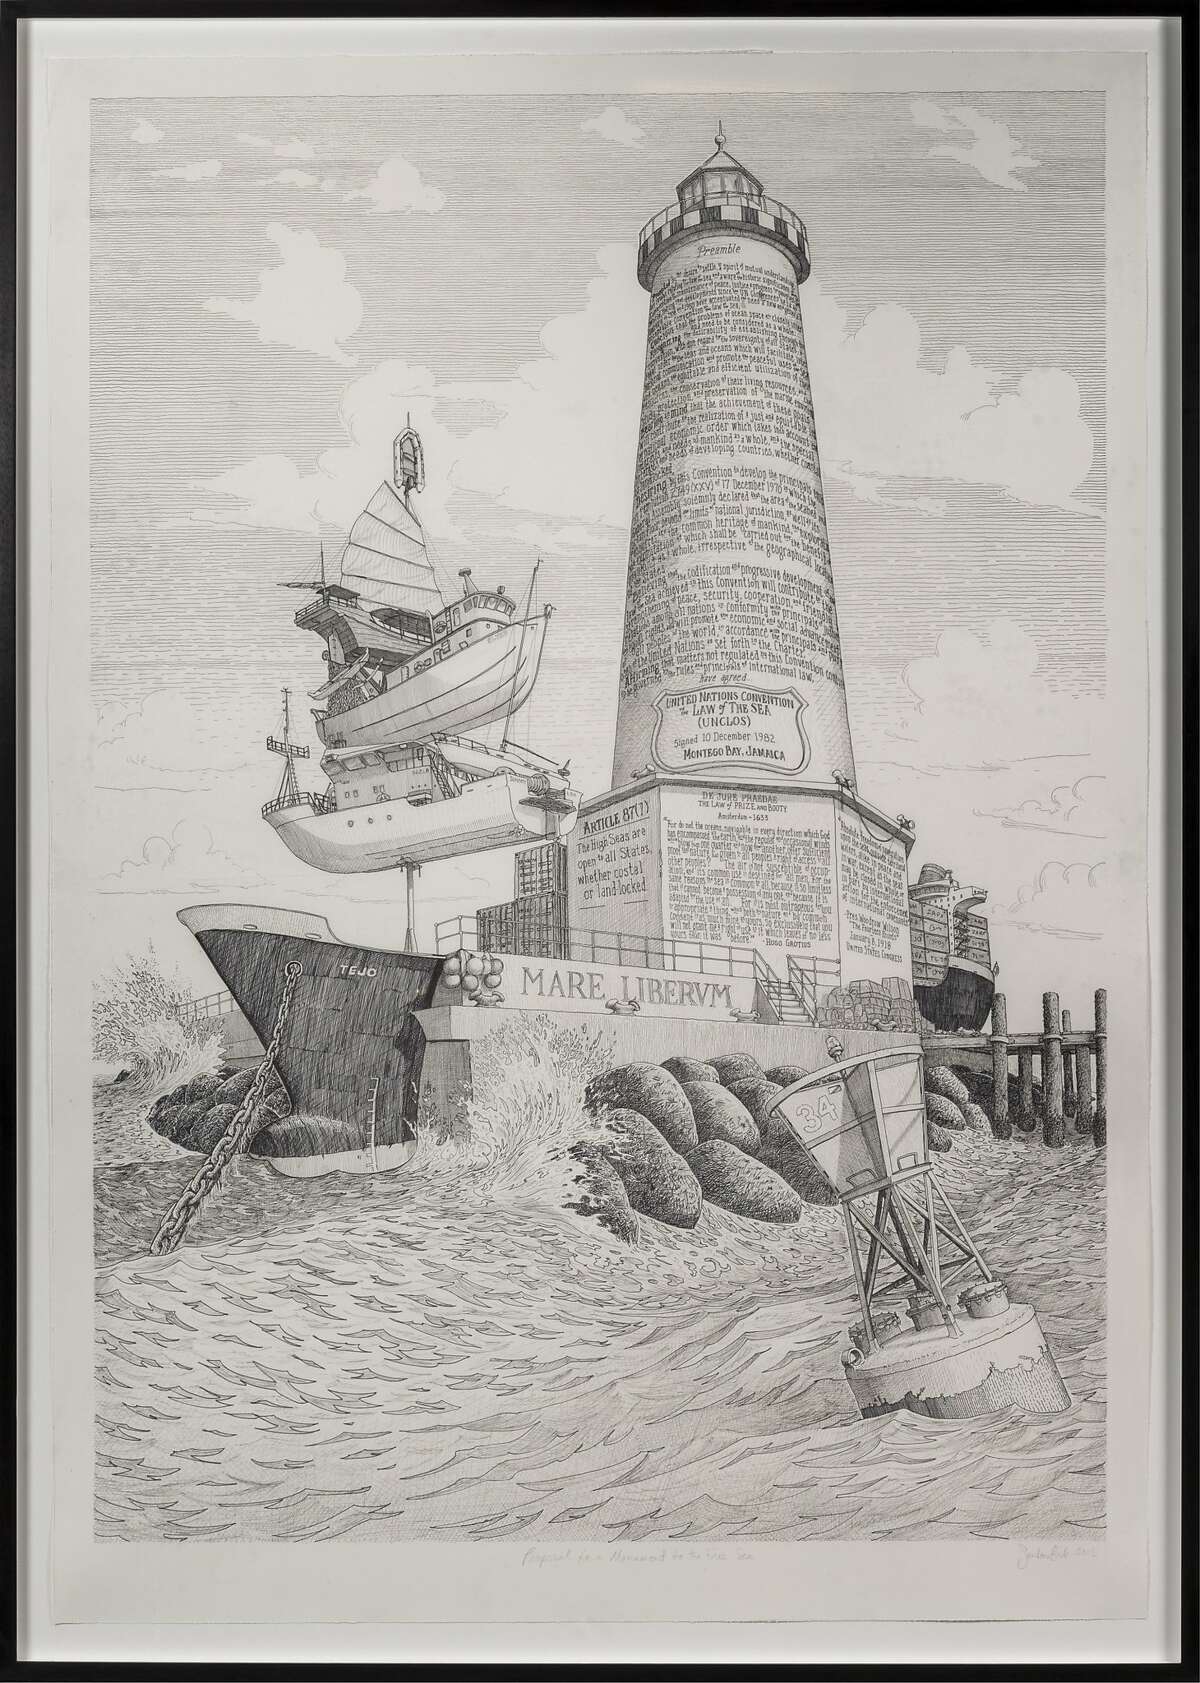 Sandow Birk's 60-by-42-inch ink on paper work "Proposal for a Monument to the Free Sea" (2015) is on display in "Sandow Birk: Imaginary Monuments" through Jan. 2 at Catharine Clark Gallery. Credit: Catharine Clark Gallery, San Francisco